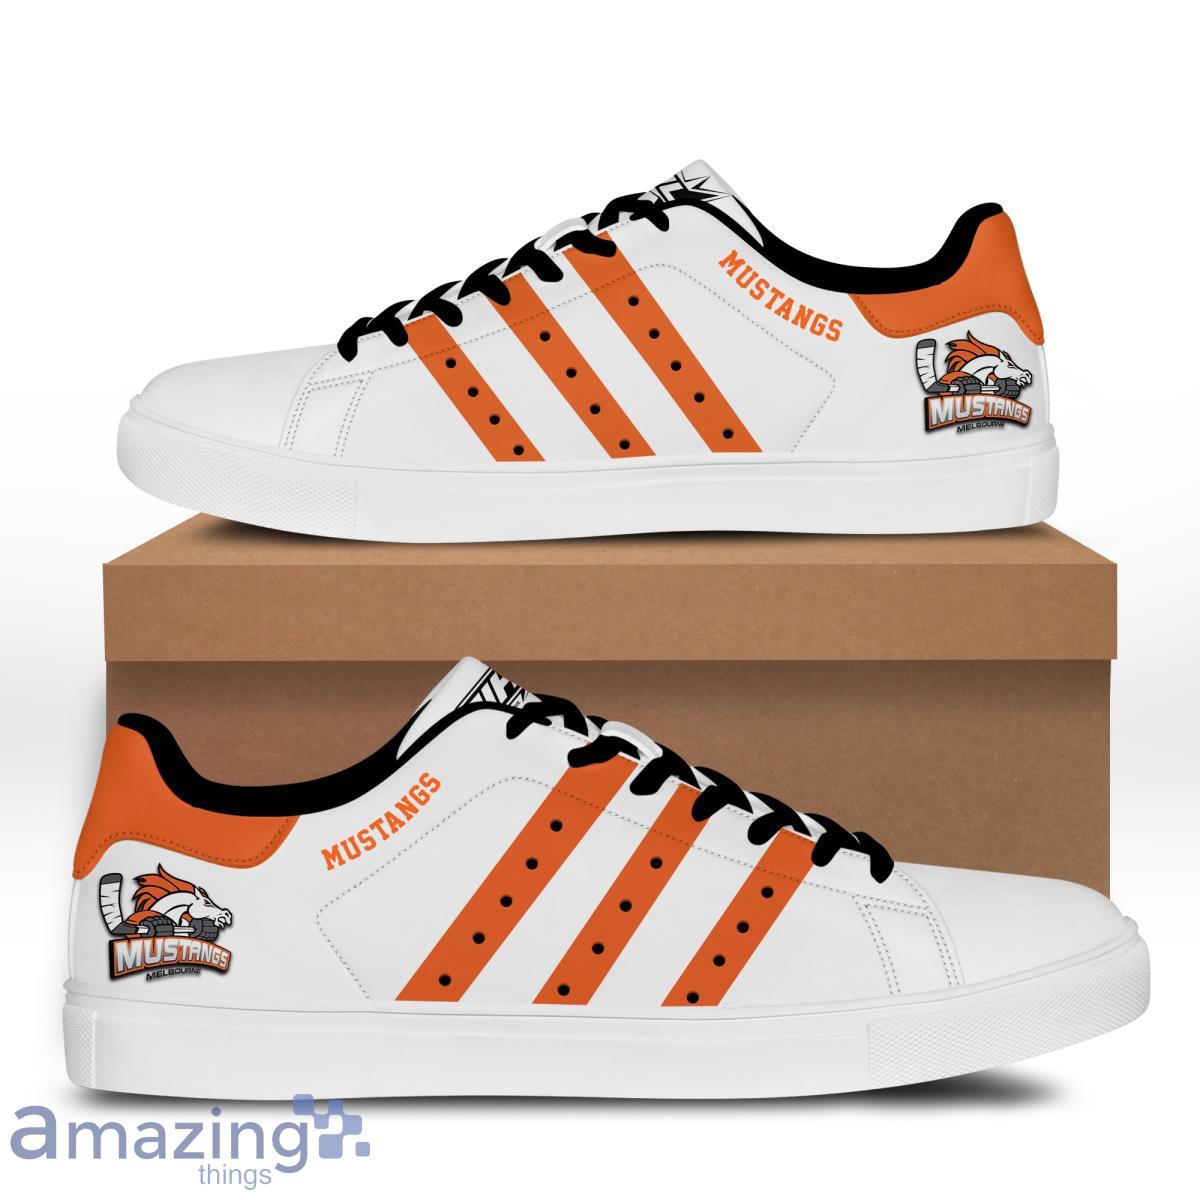 AIHL Melbourne Mustangs Skate Shoes Product Photo 1